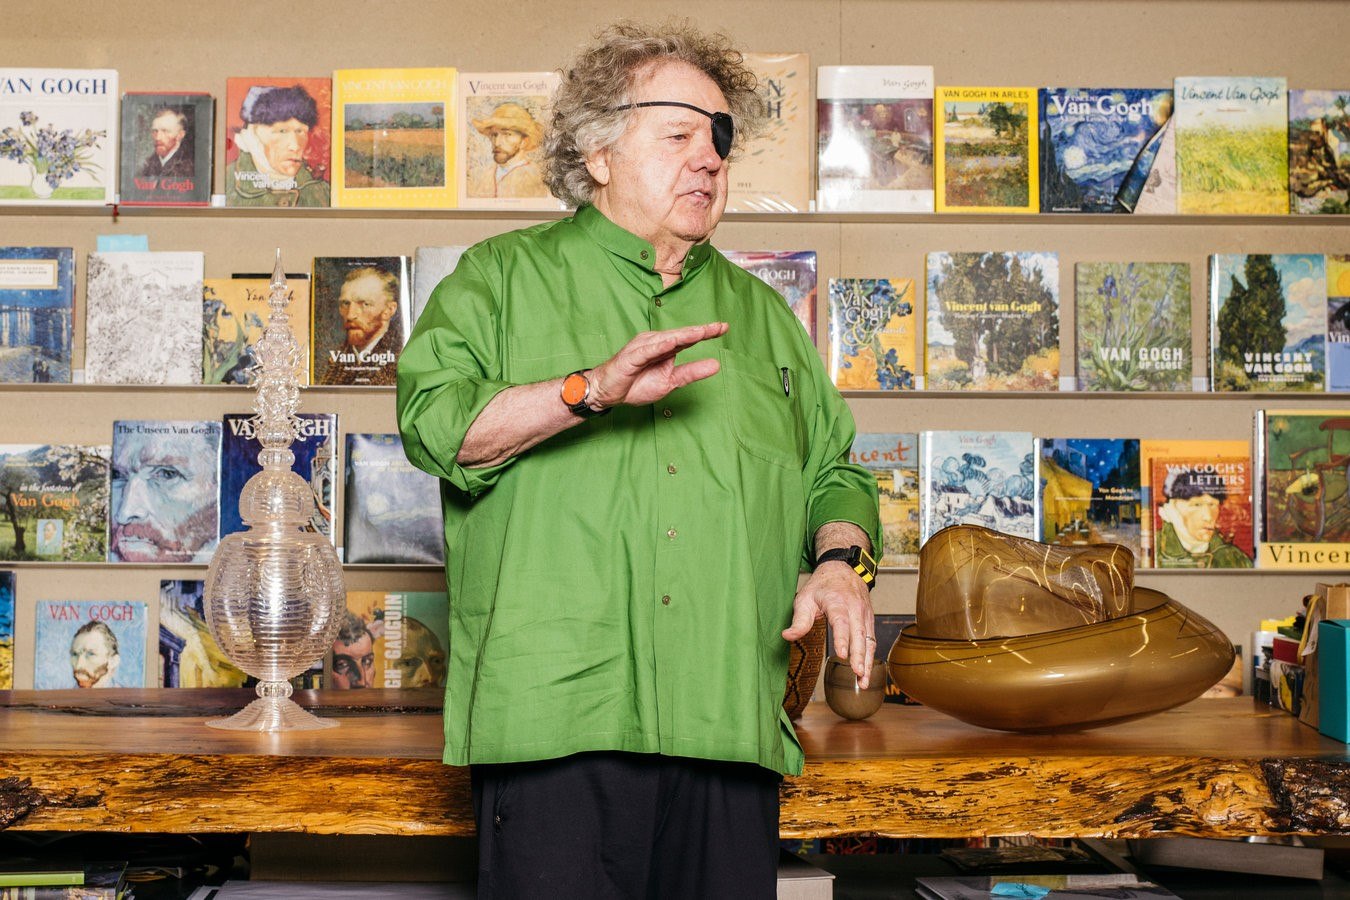 21-surprising-facts-about-dale-chihuly